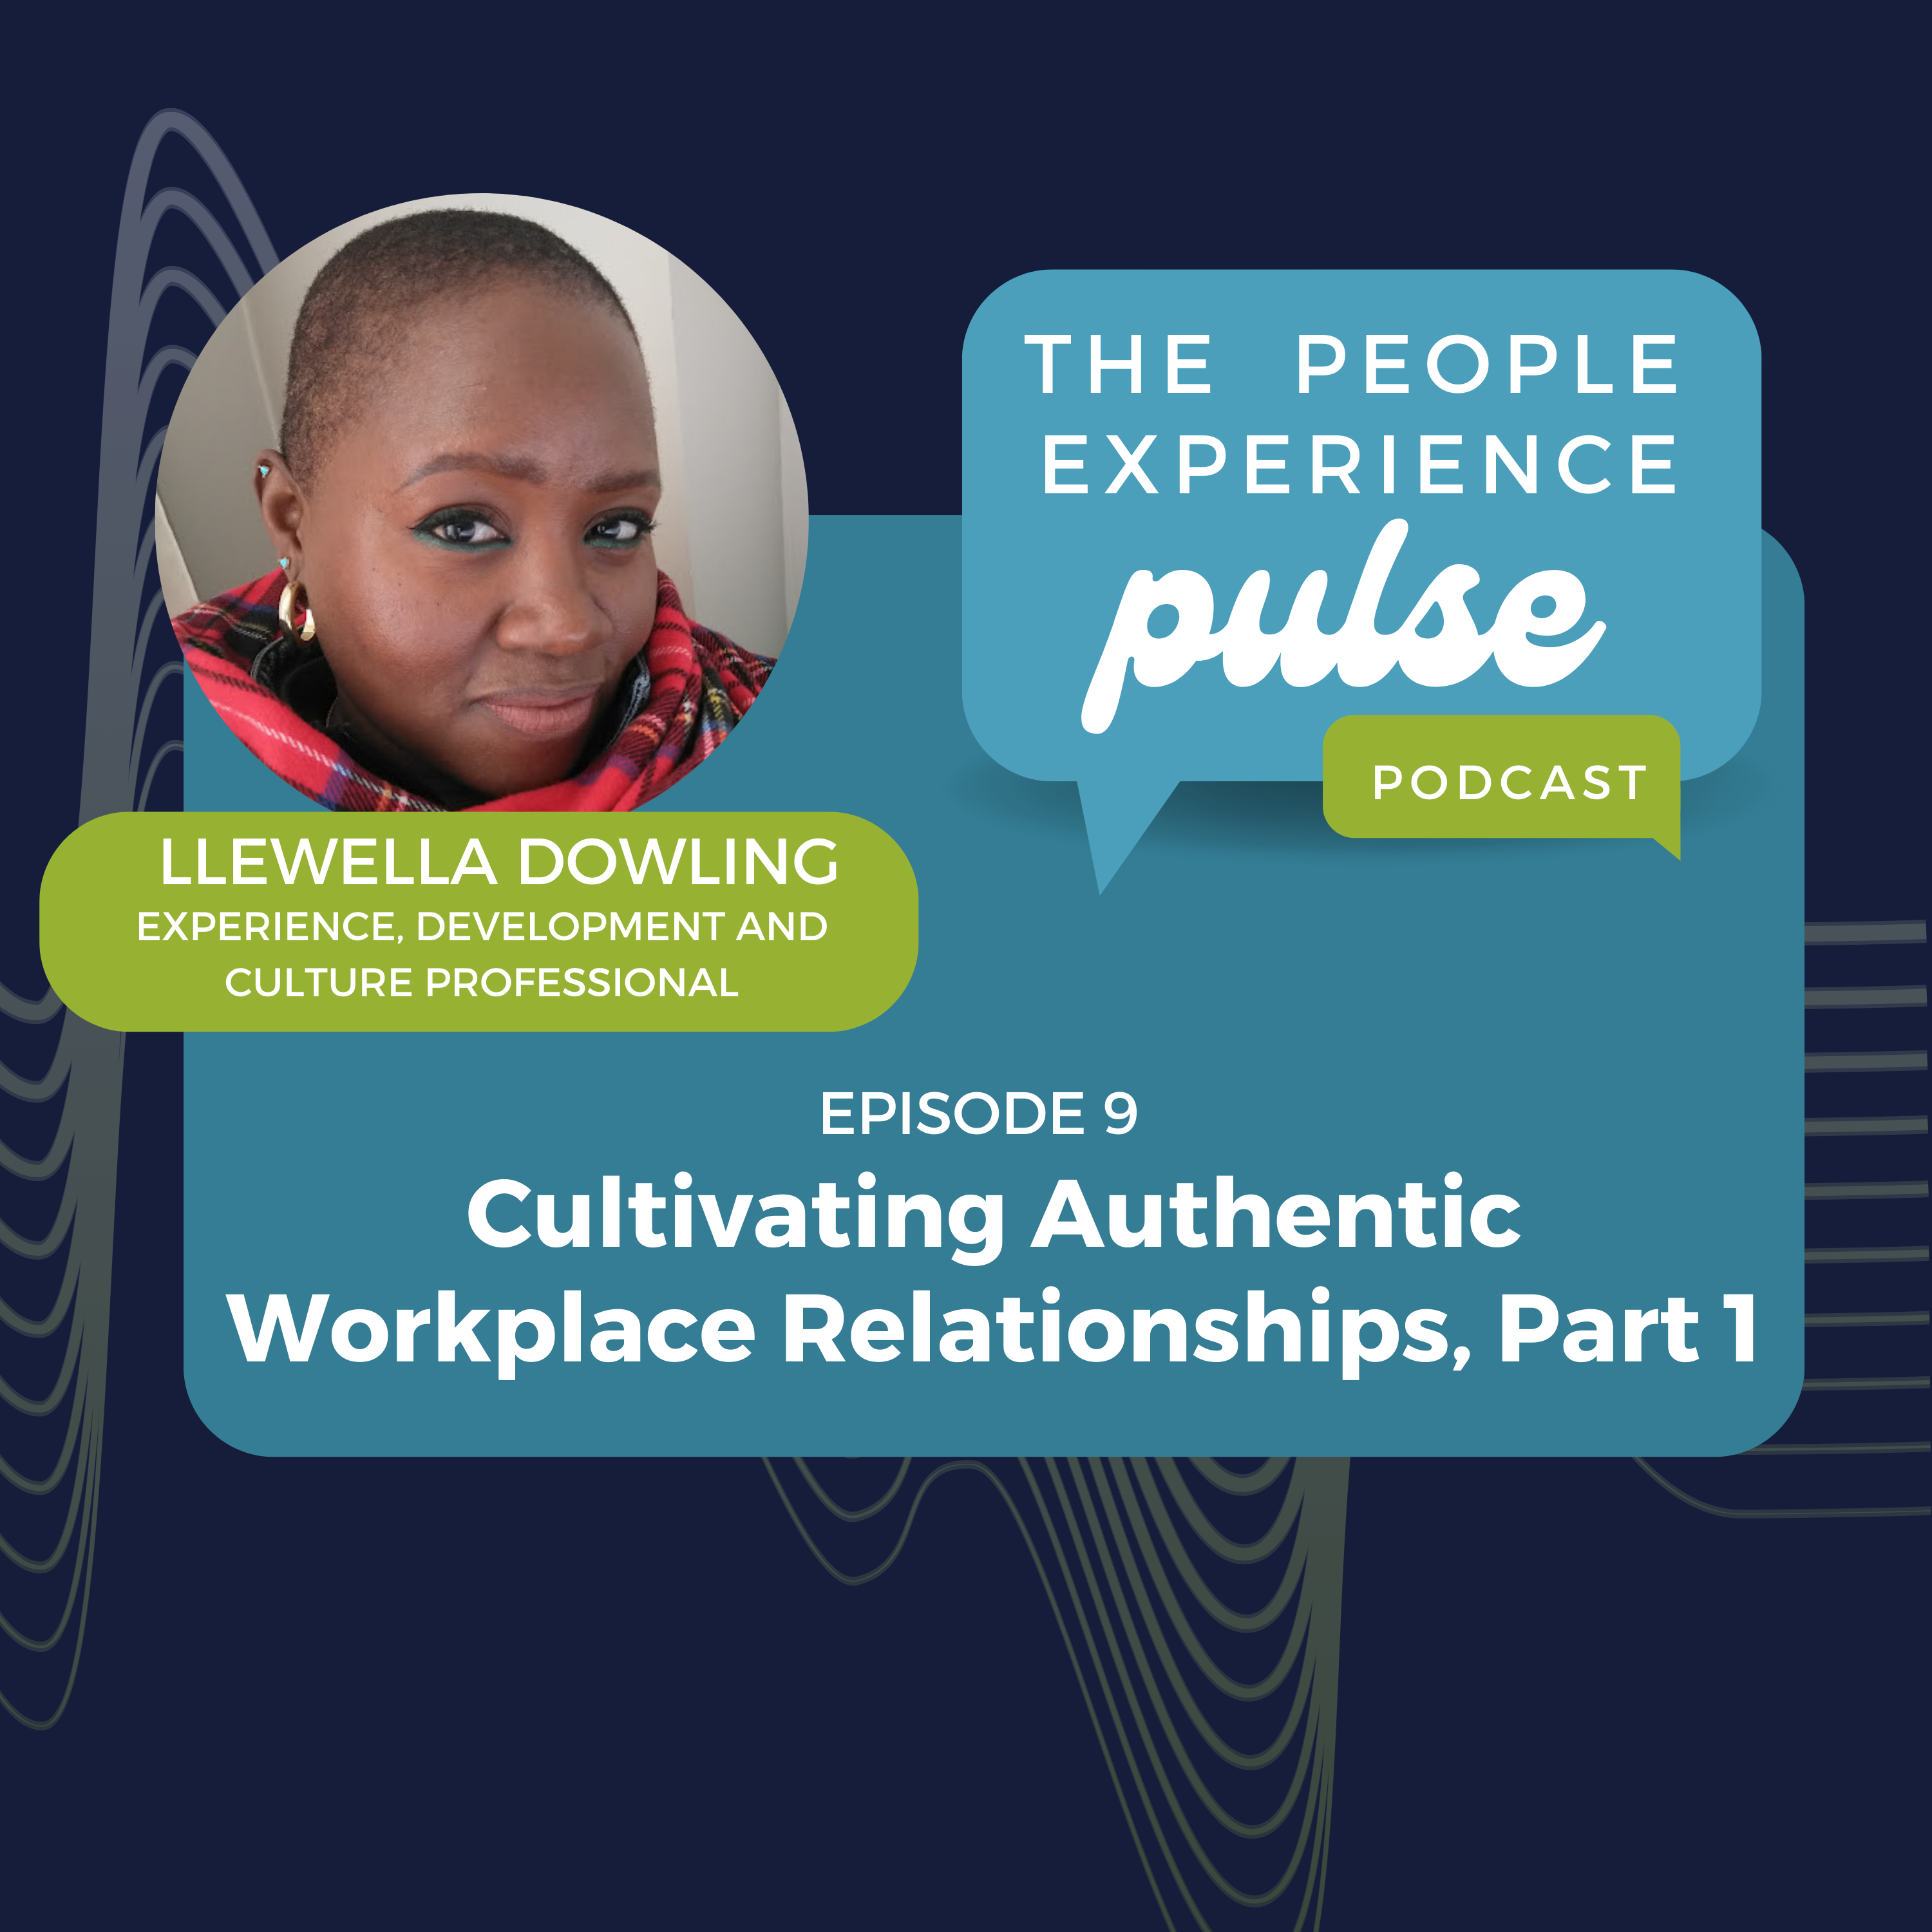 Cultivating Authentic Workplace Relationships with Llewella Dowling, Part 1